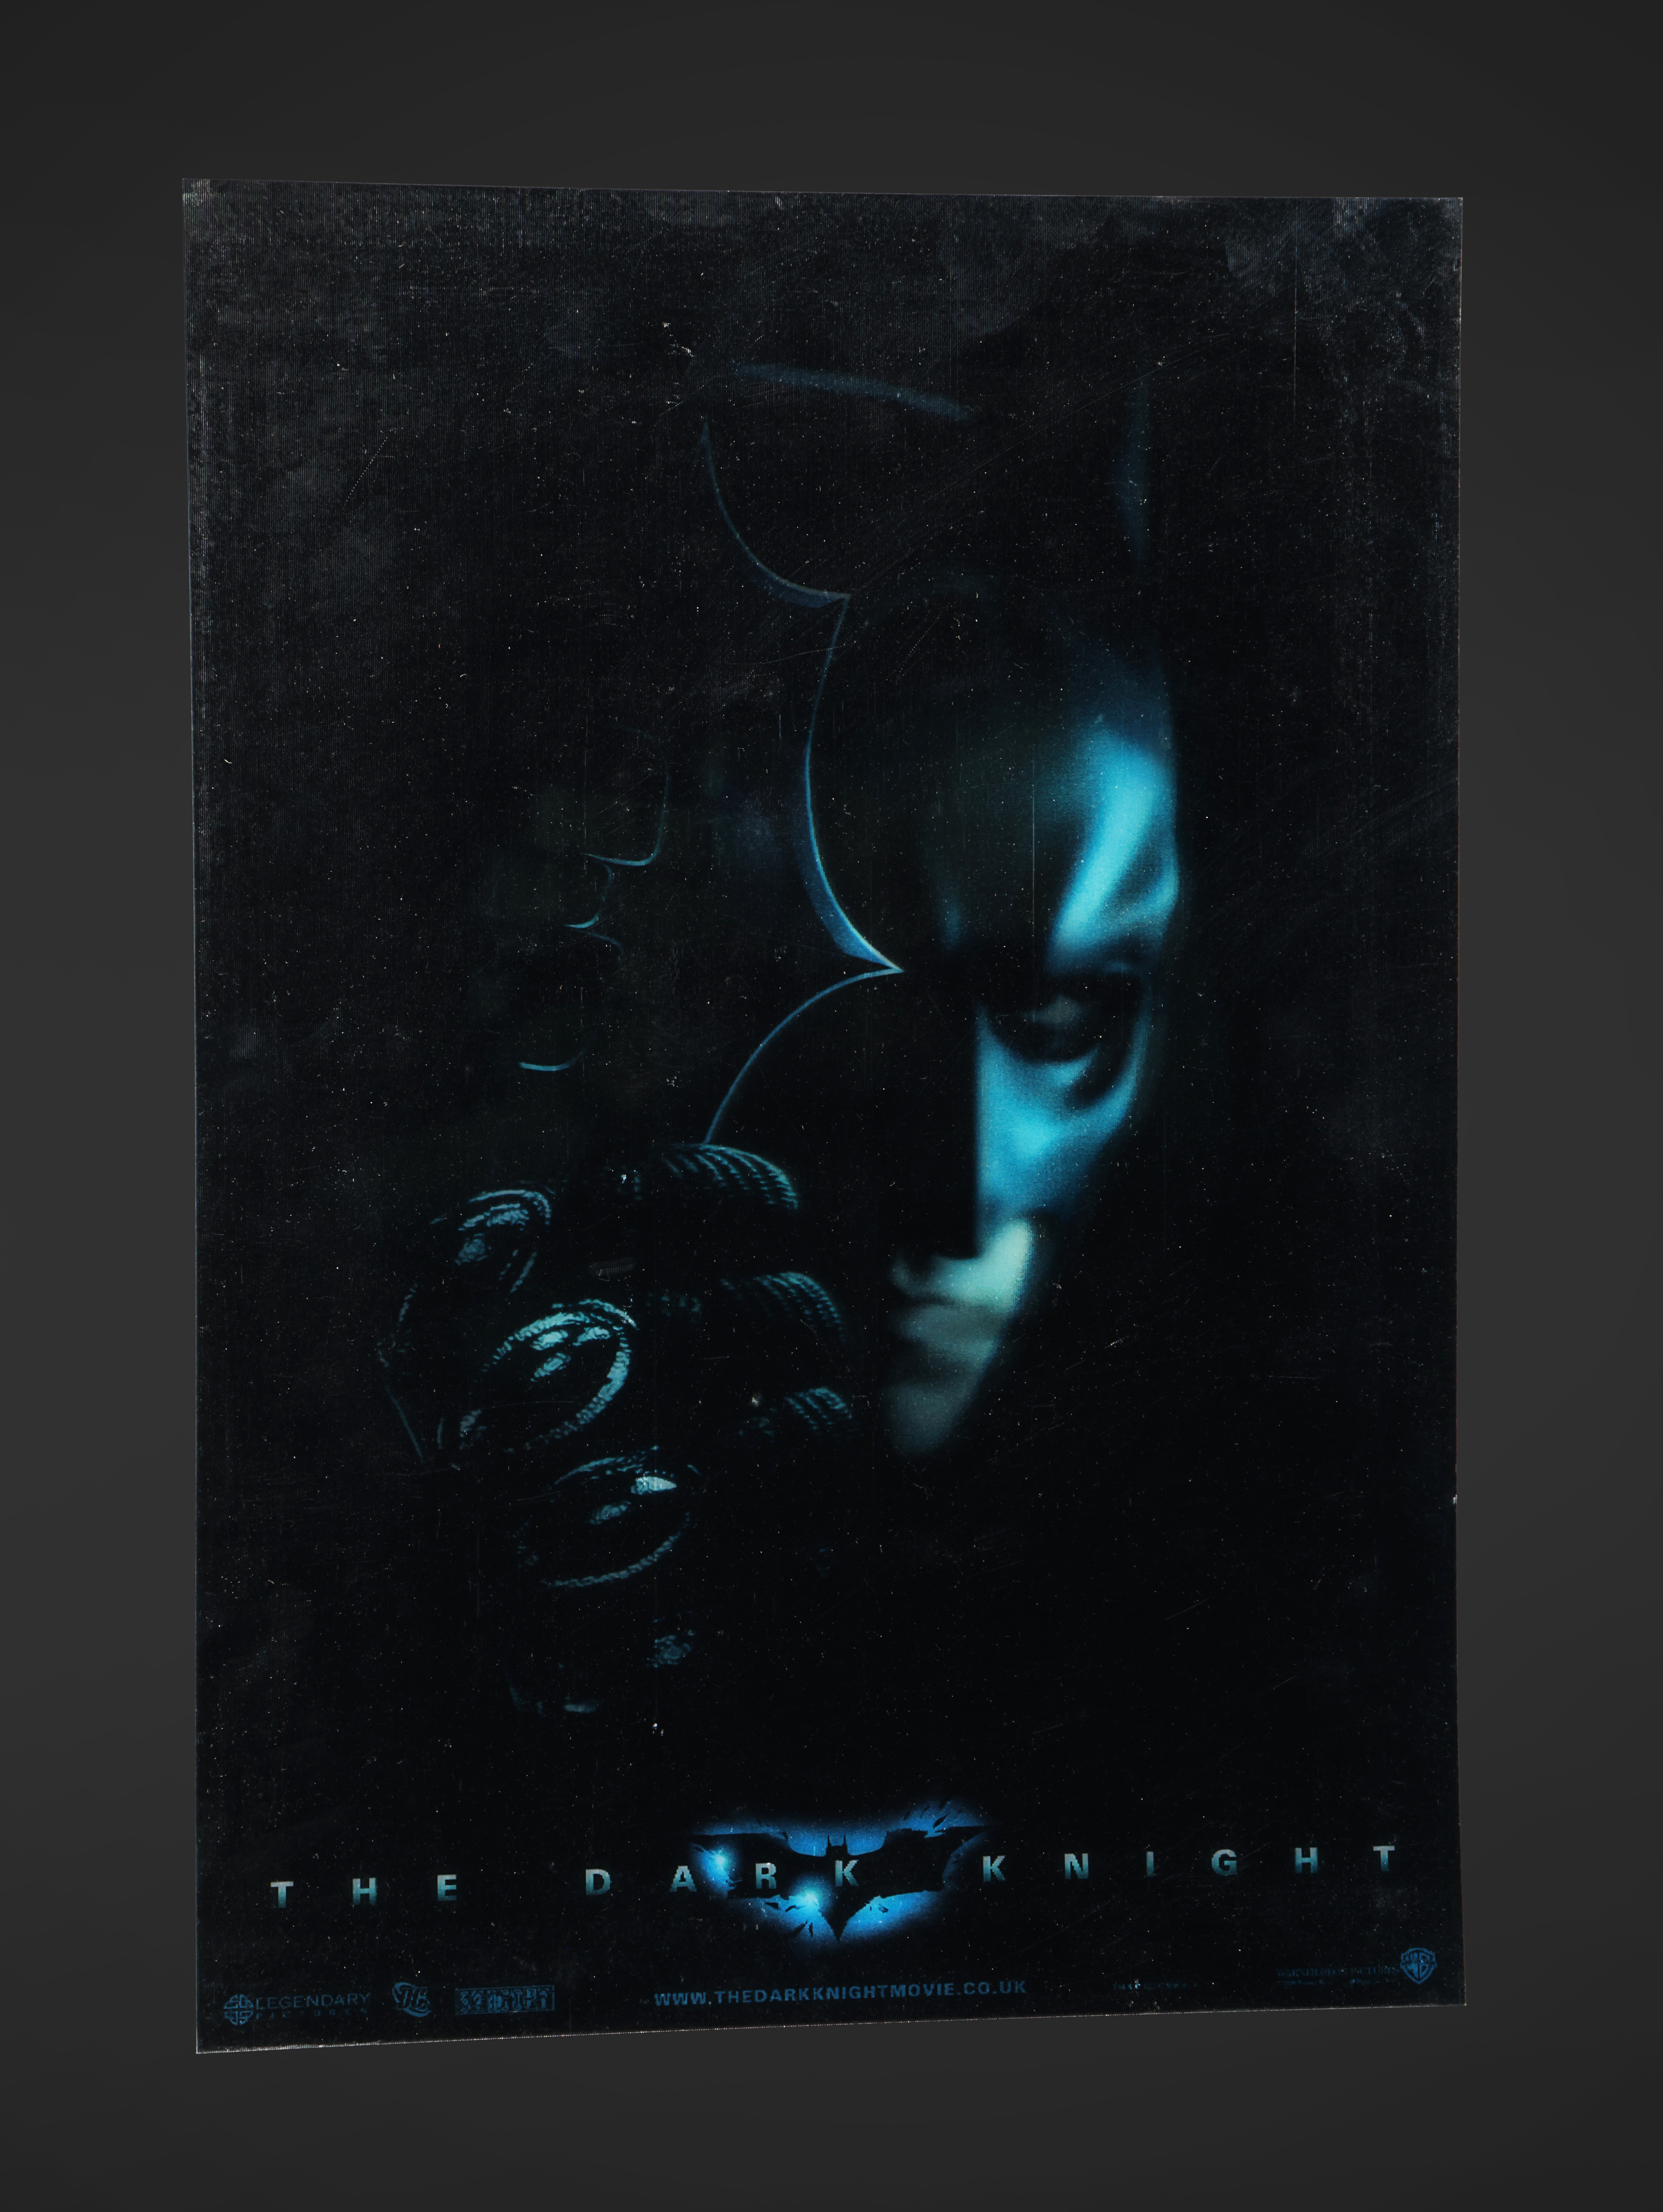 THE DARK KNIGHT (2008) - Special Poster - 3D Lenticular, 2008 - Image 2 of 3